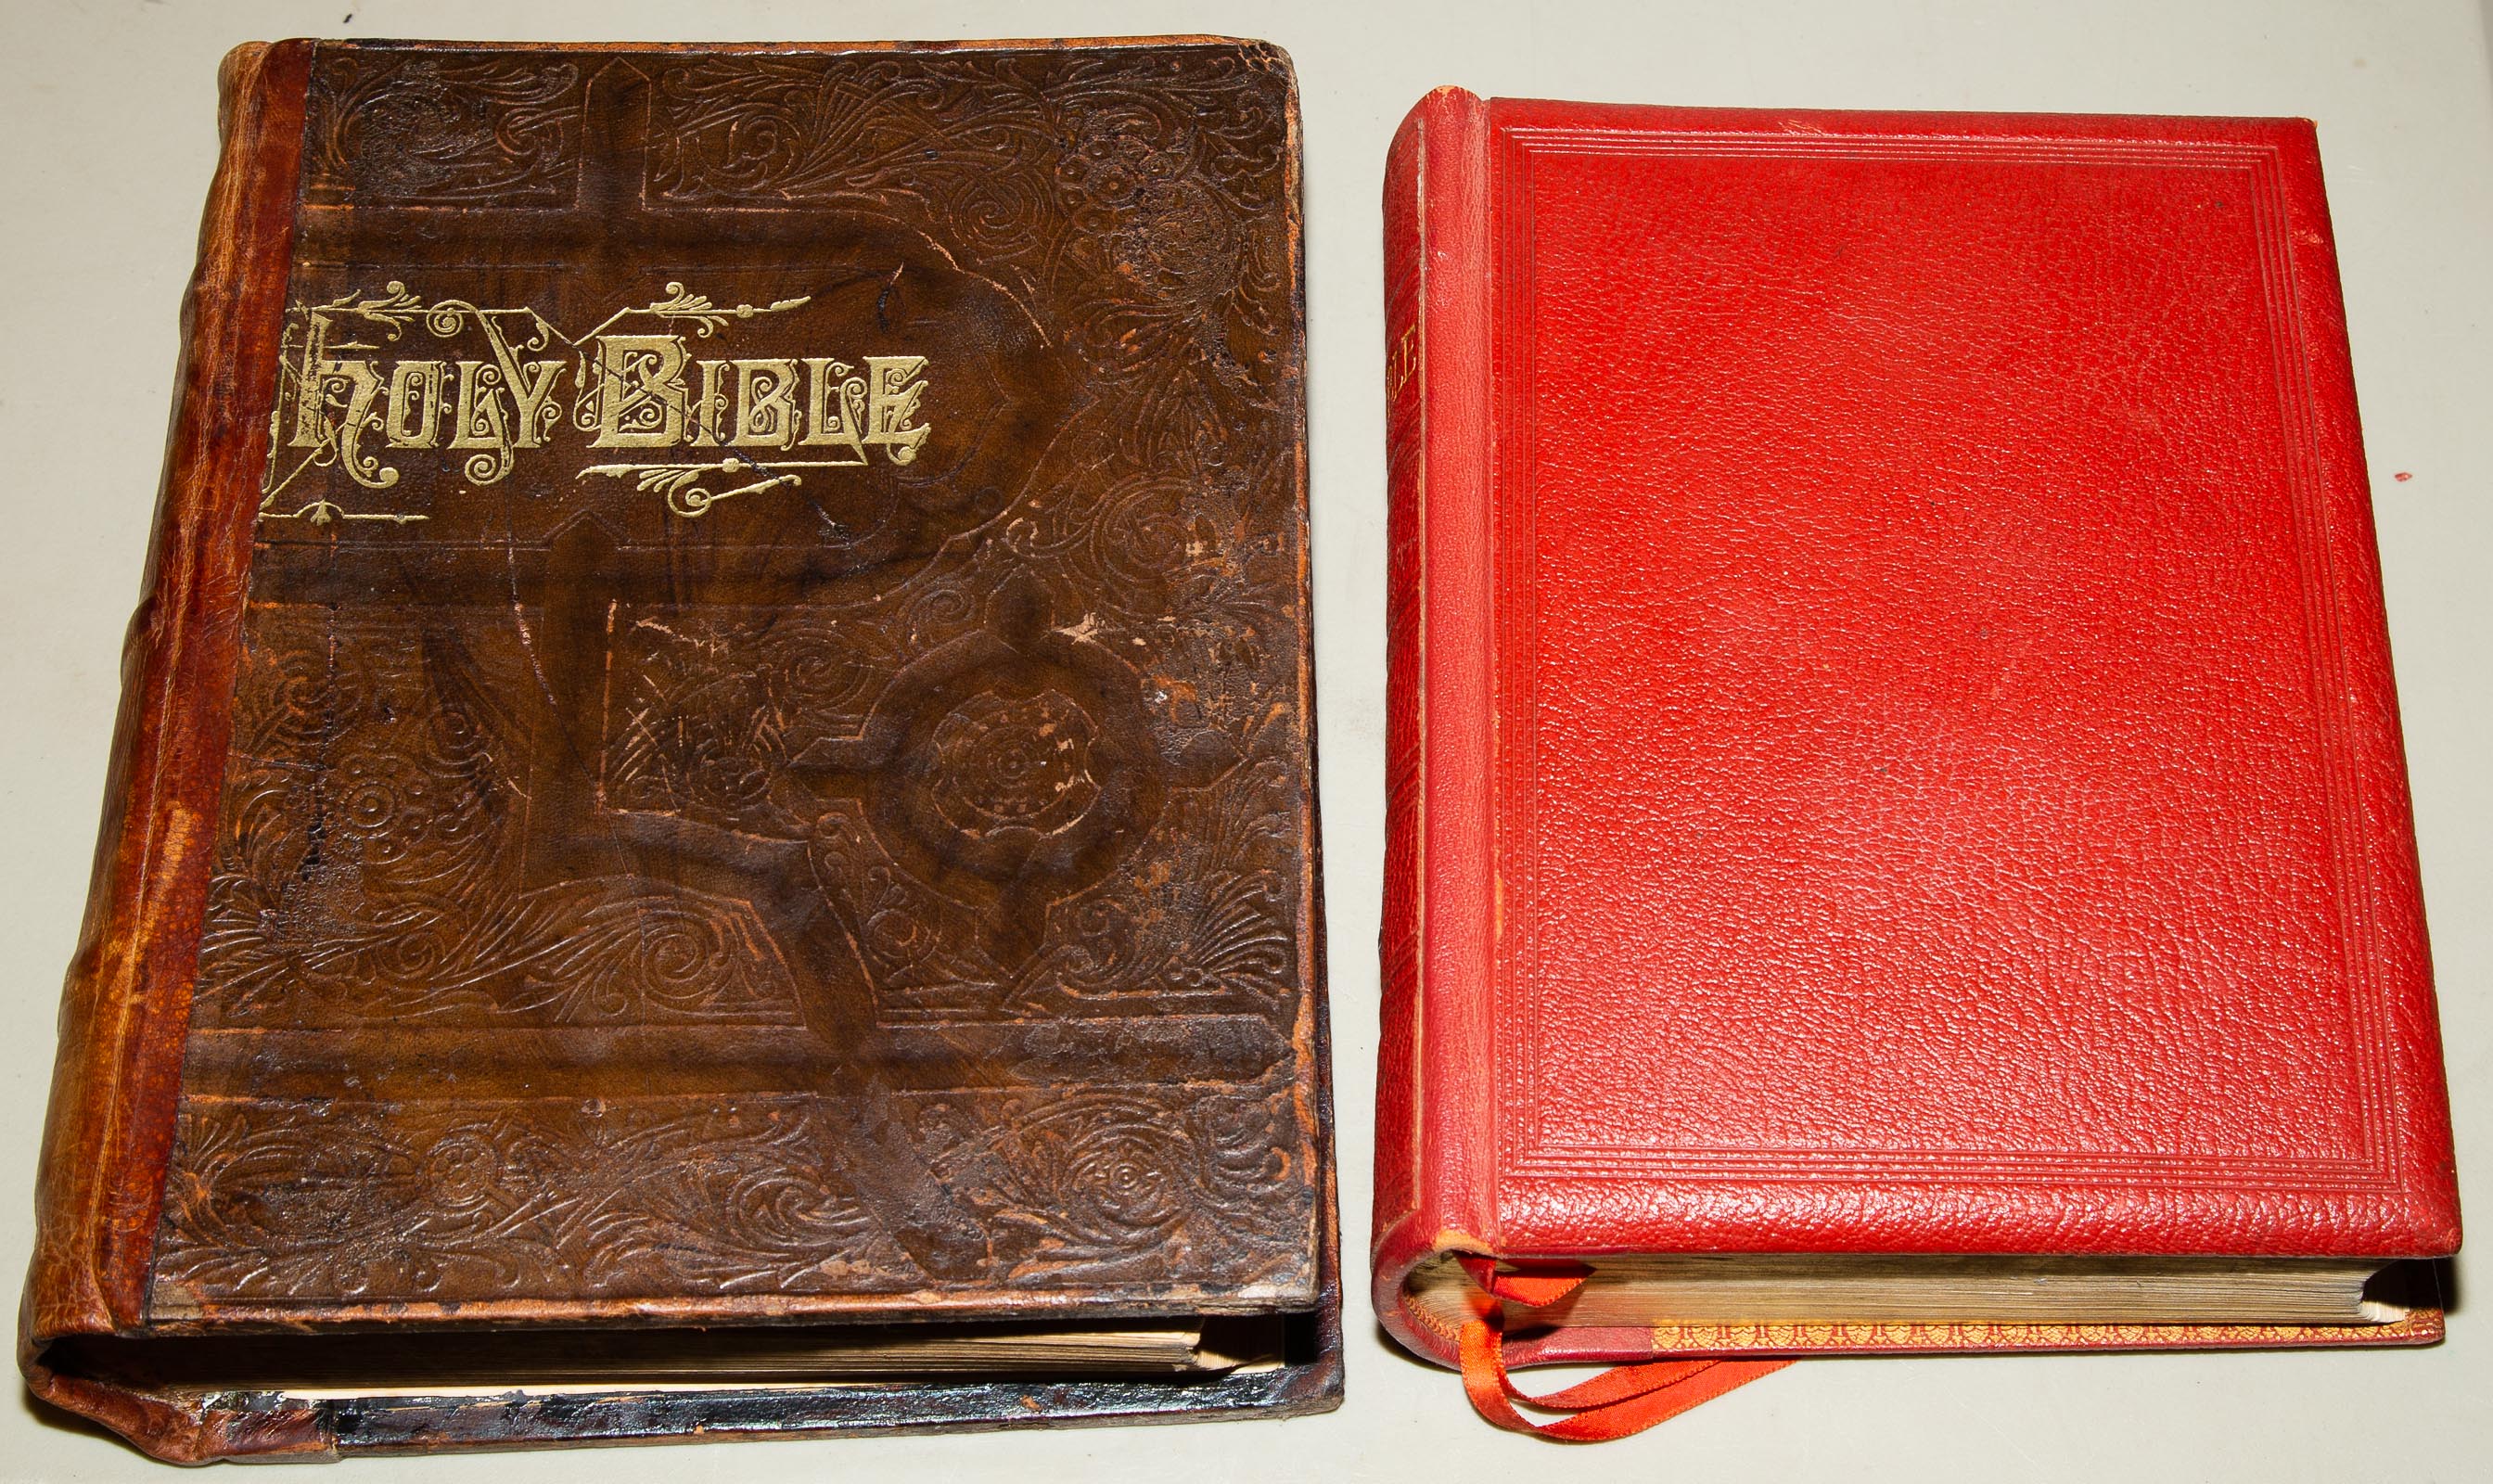 TWO FAMILY BIBLES PRONOUCING EDITION 338978